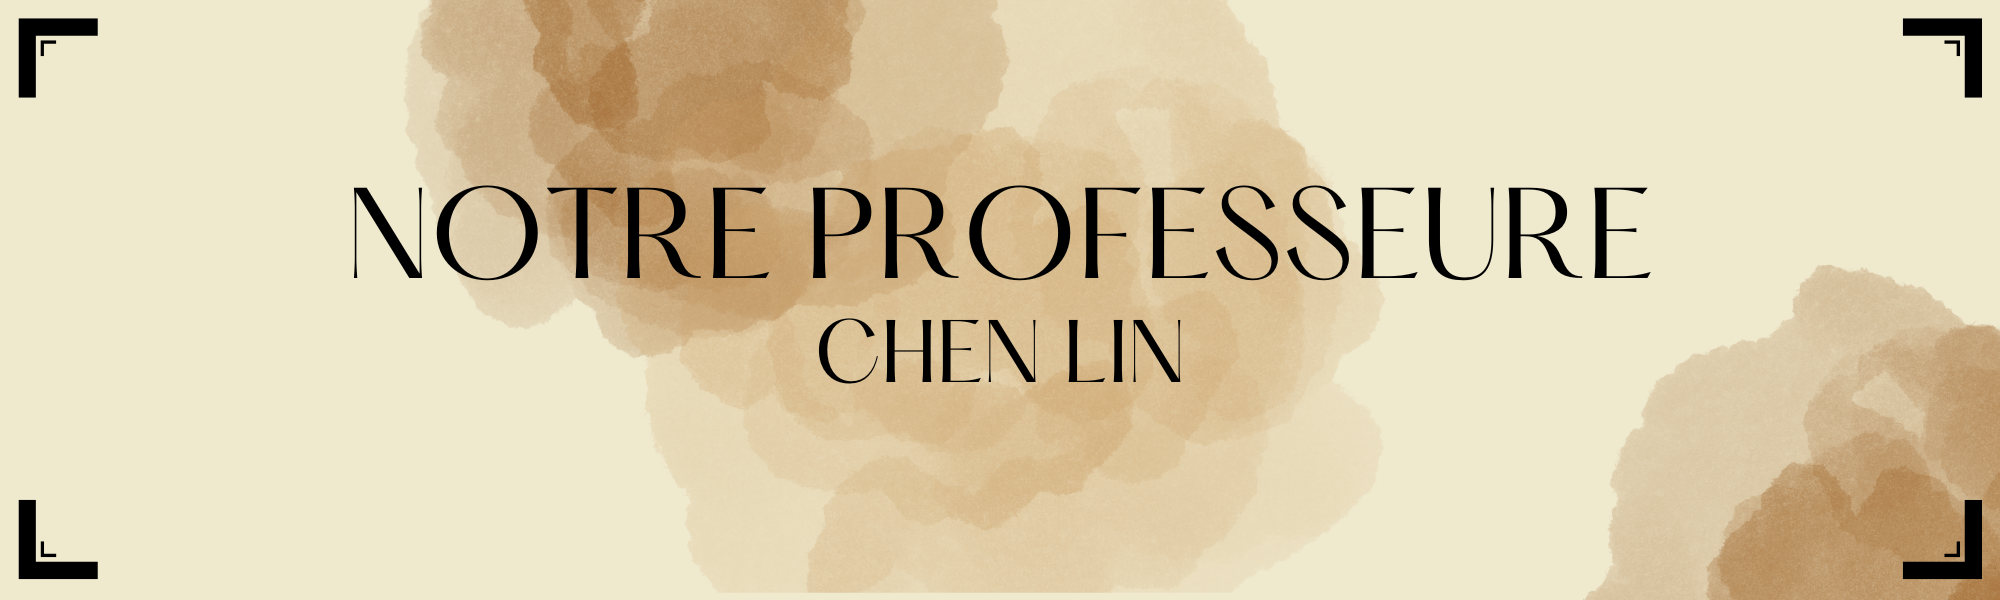 Introduction ChenLin